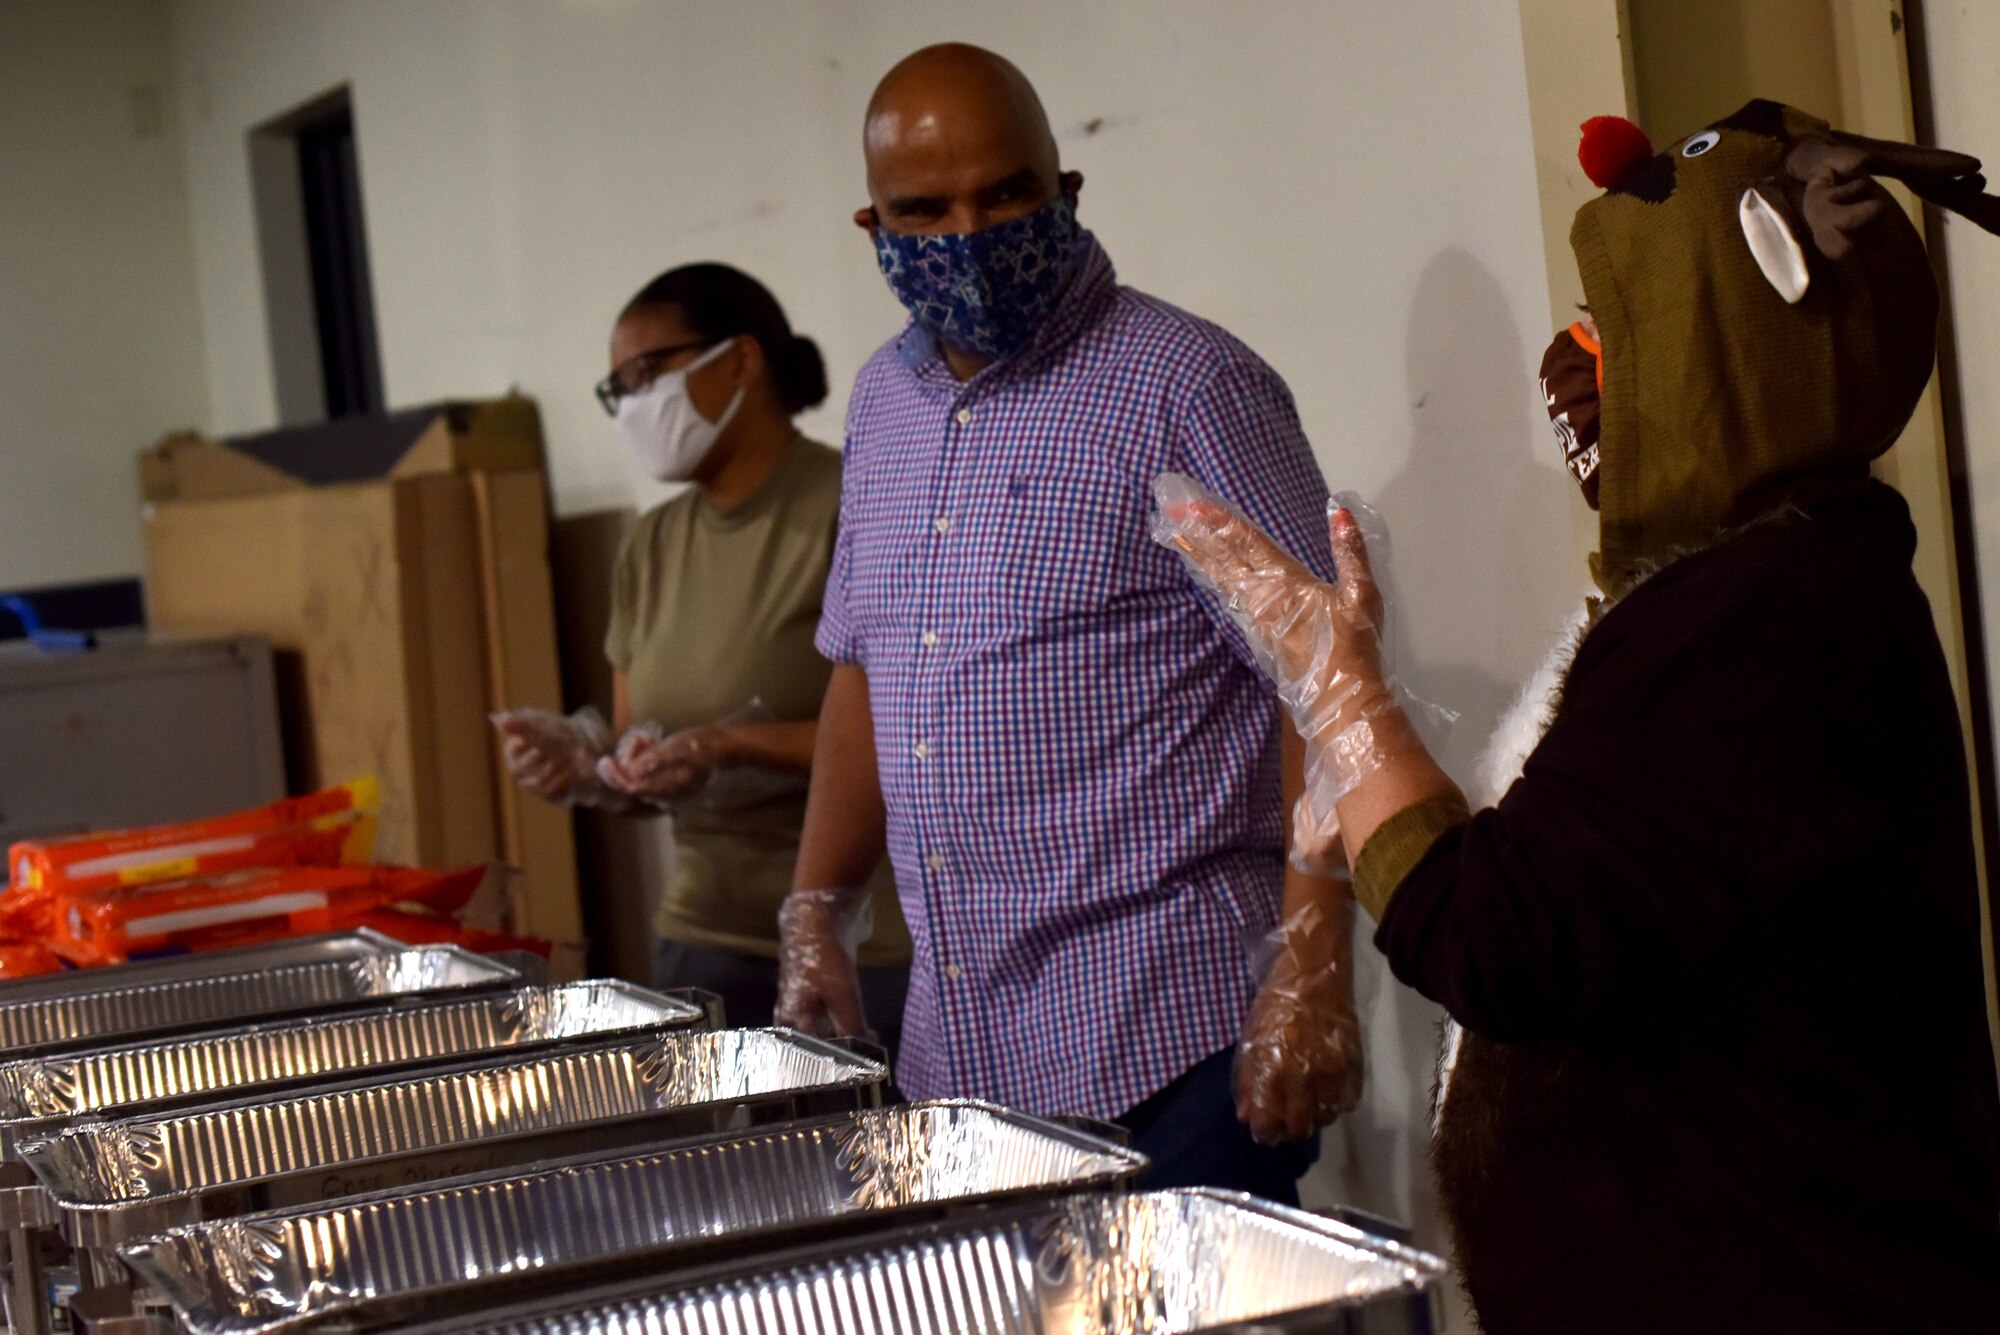 Volunteers prepare to serve the early Thanksgiving meal at The Crossroads Student Center on Goodfellow Air Force Base, Texas, Nov. 24, 2020. Volunteers wore masks and gloves while serving food for students. (U.S. Air Force photo by Staff Sgt. Seraiah Wolf)